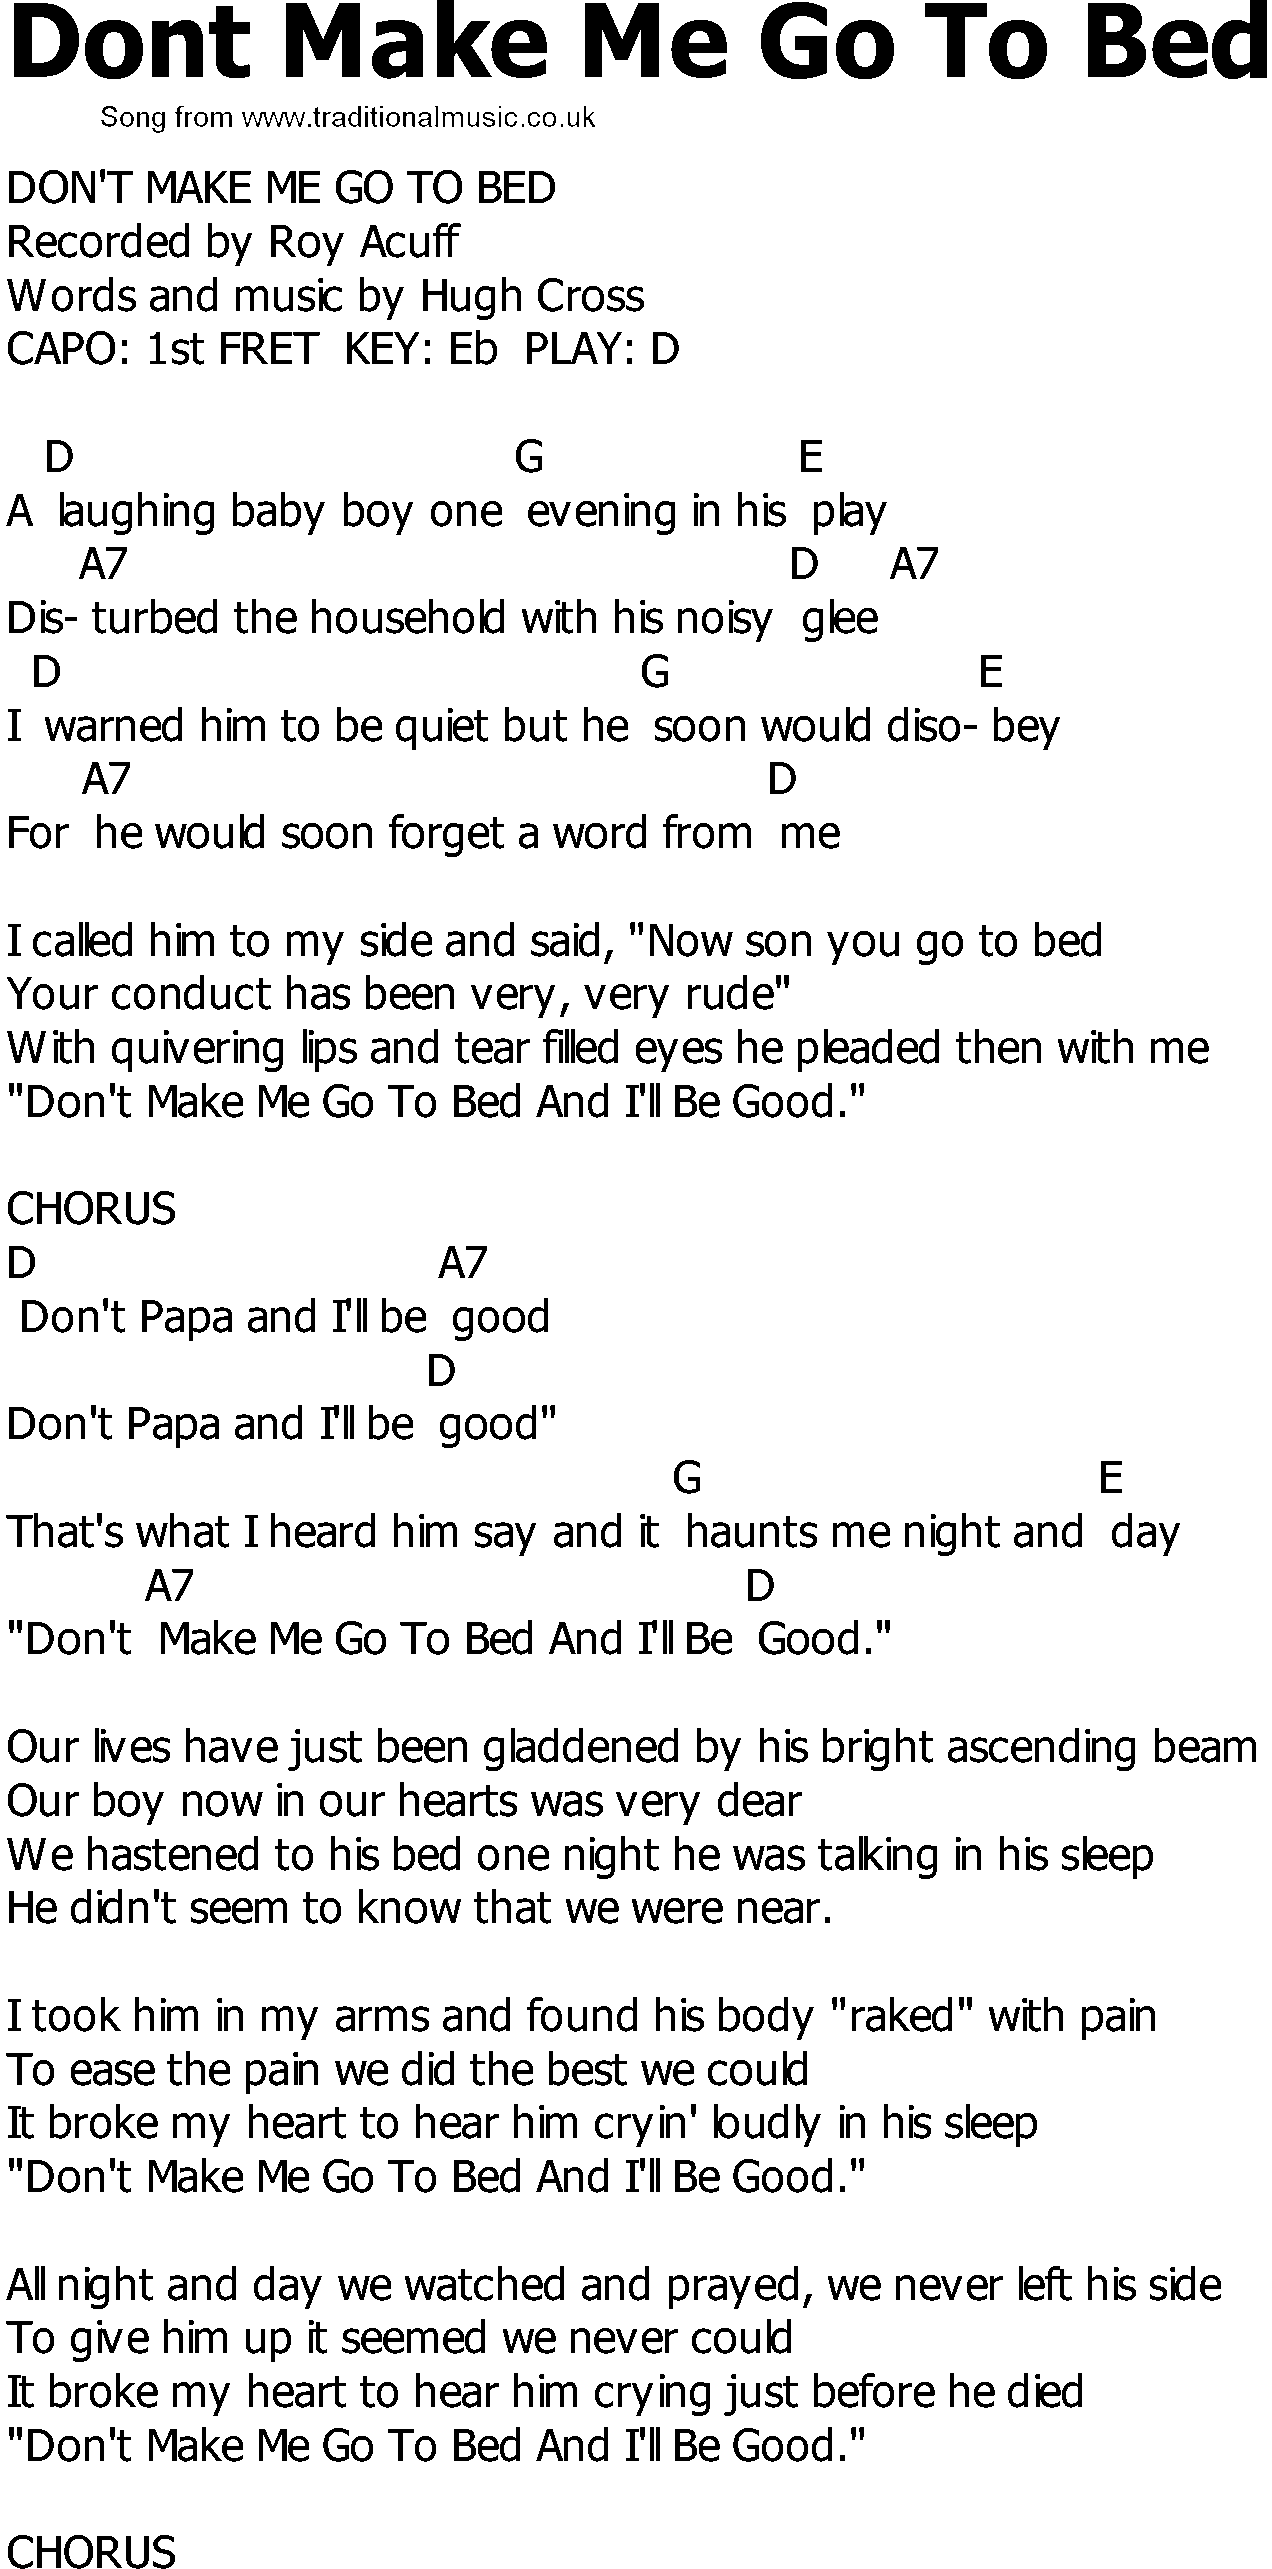 Old Country song lyrics with chords - Dont Make Me Go To Bed